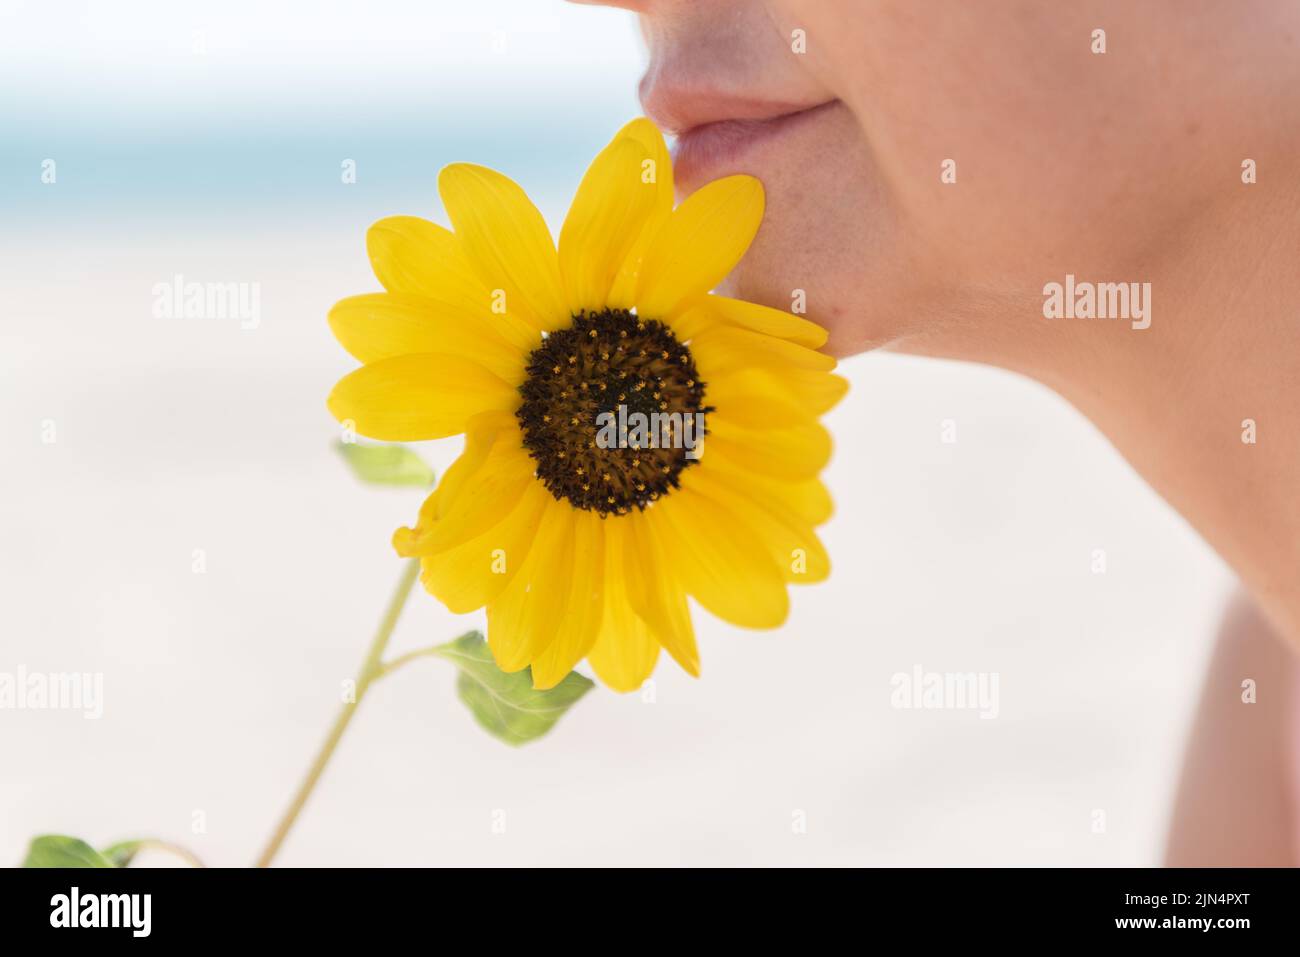 Close-up of the lower half of a woman's face with a sunflower against a blurred background of the sea, side view. Stock Photo